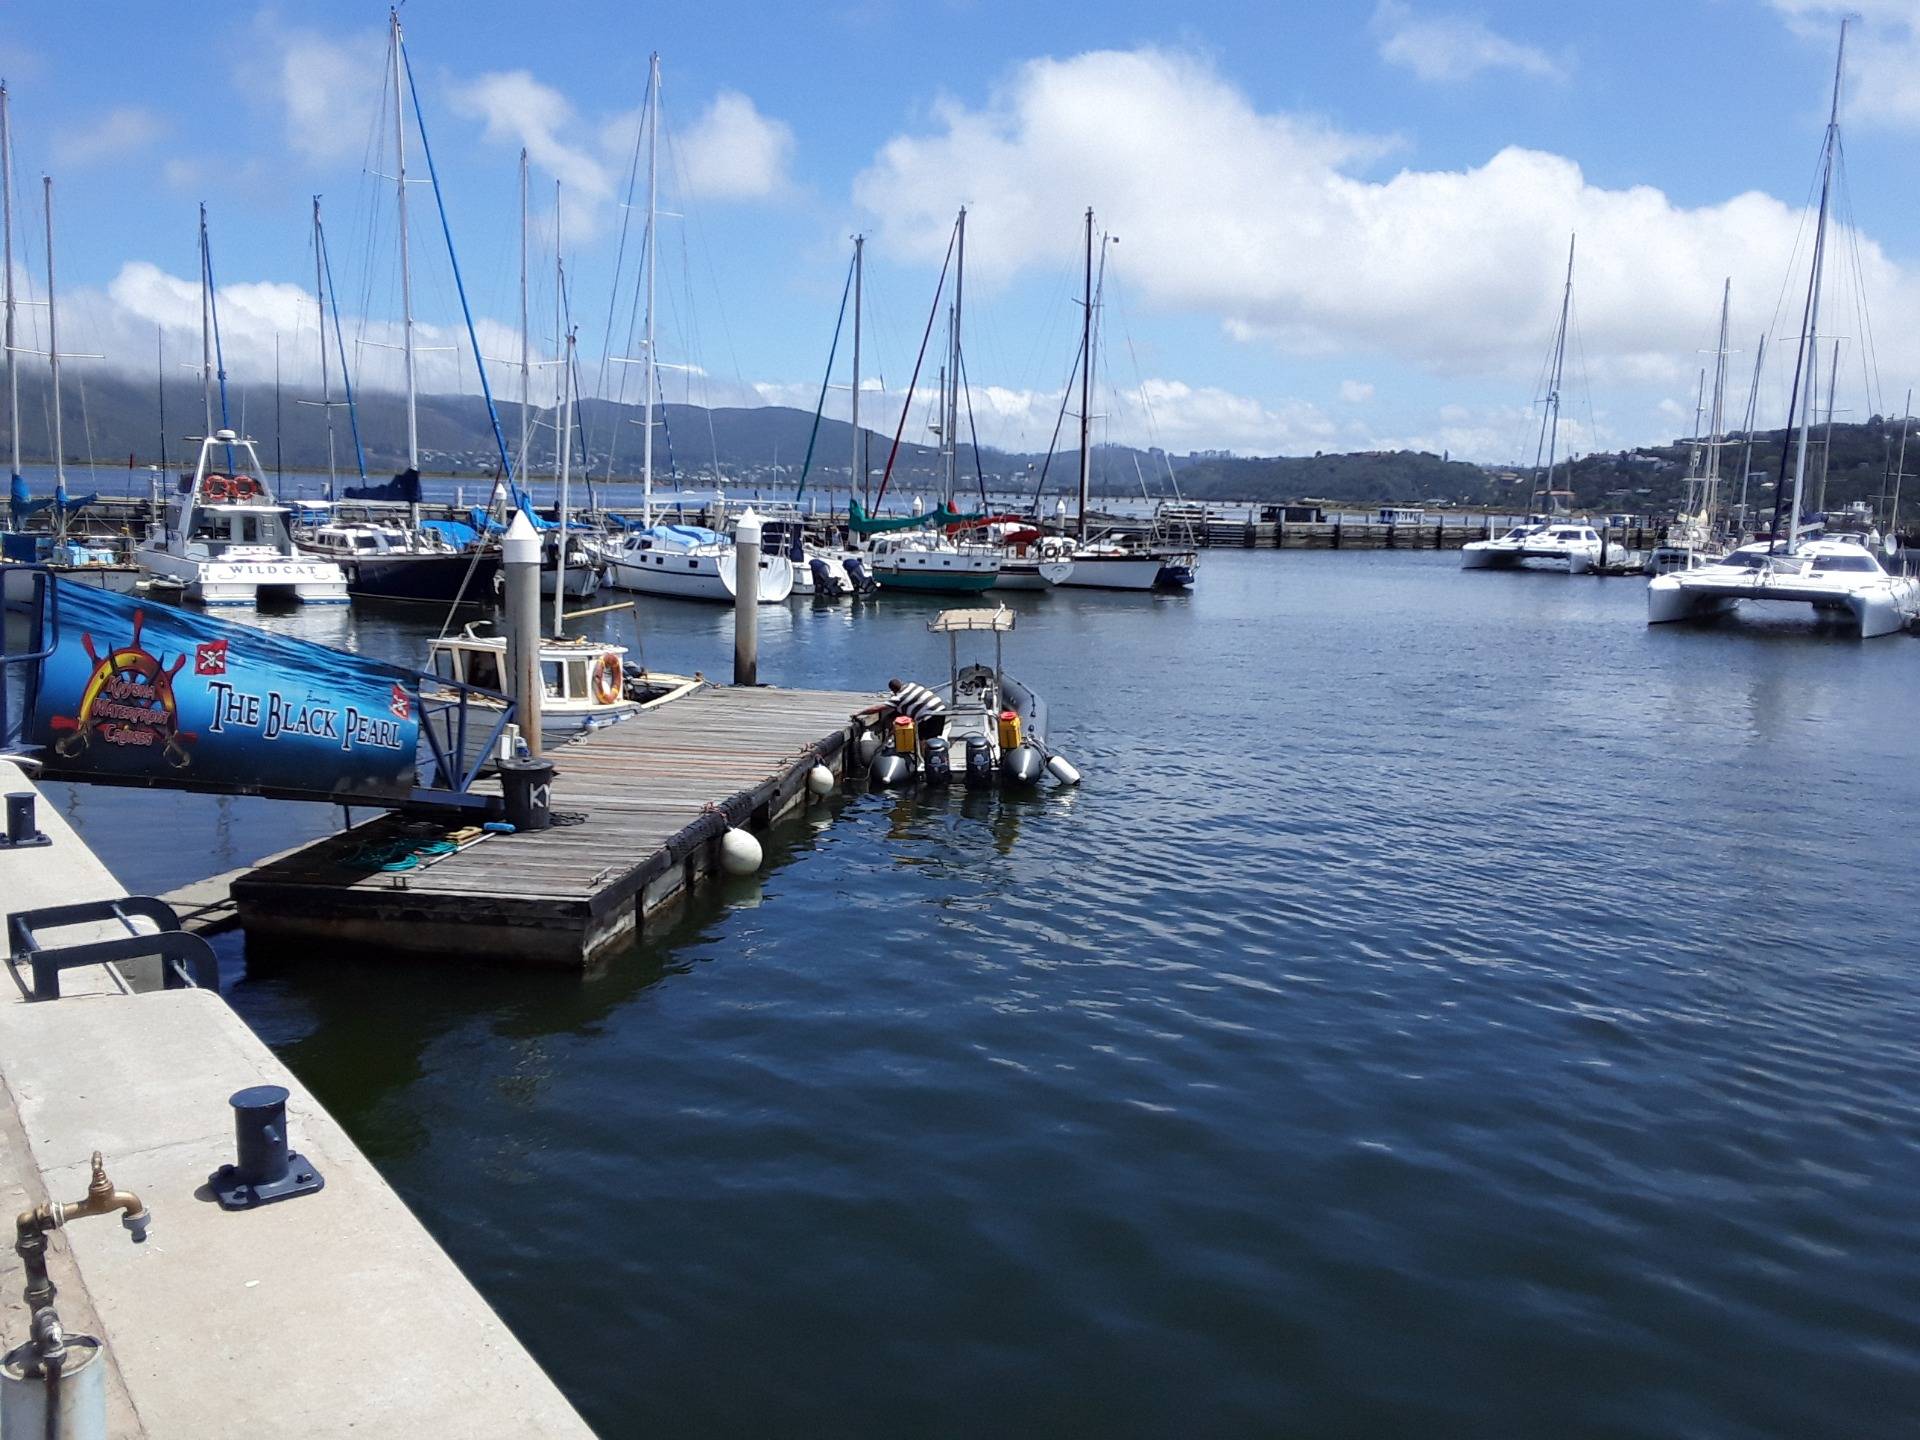 Exploring the beautiful tourist town of Knysna on the south Cape coast of Africa